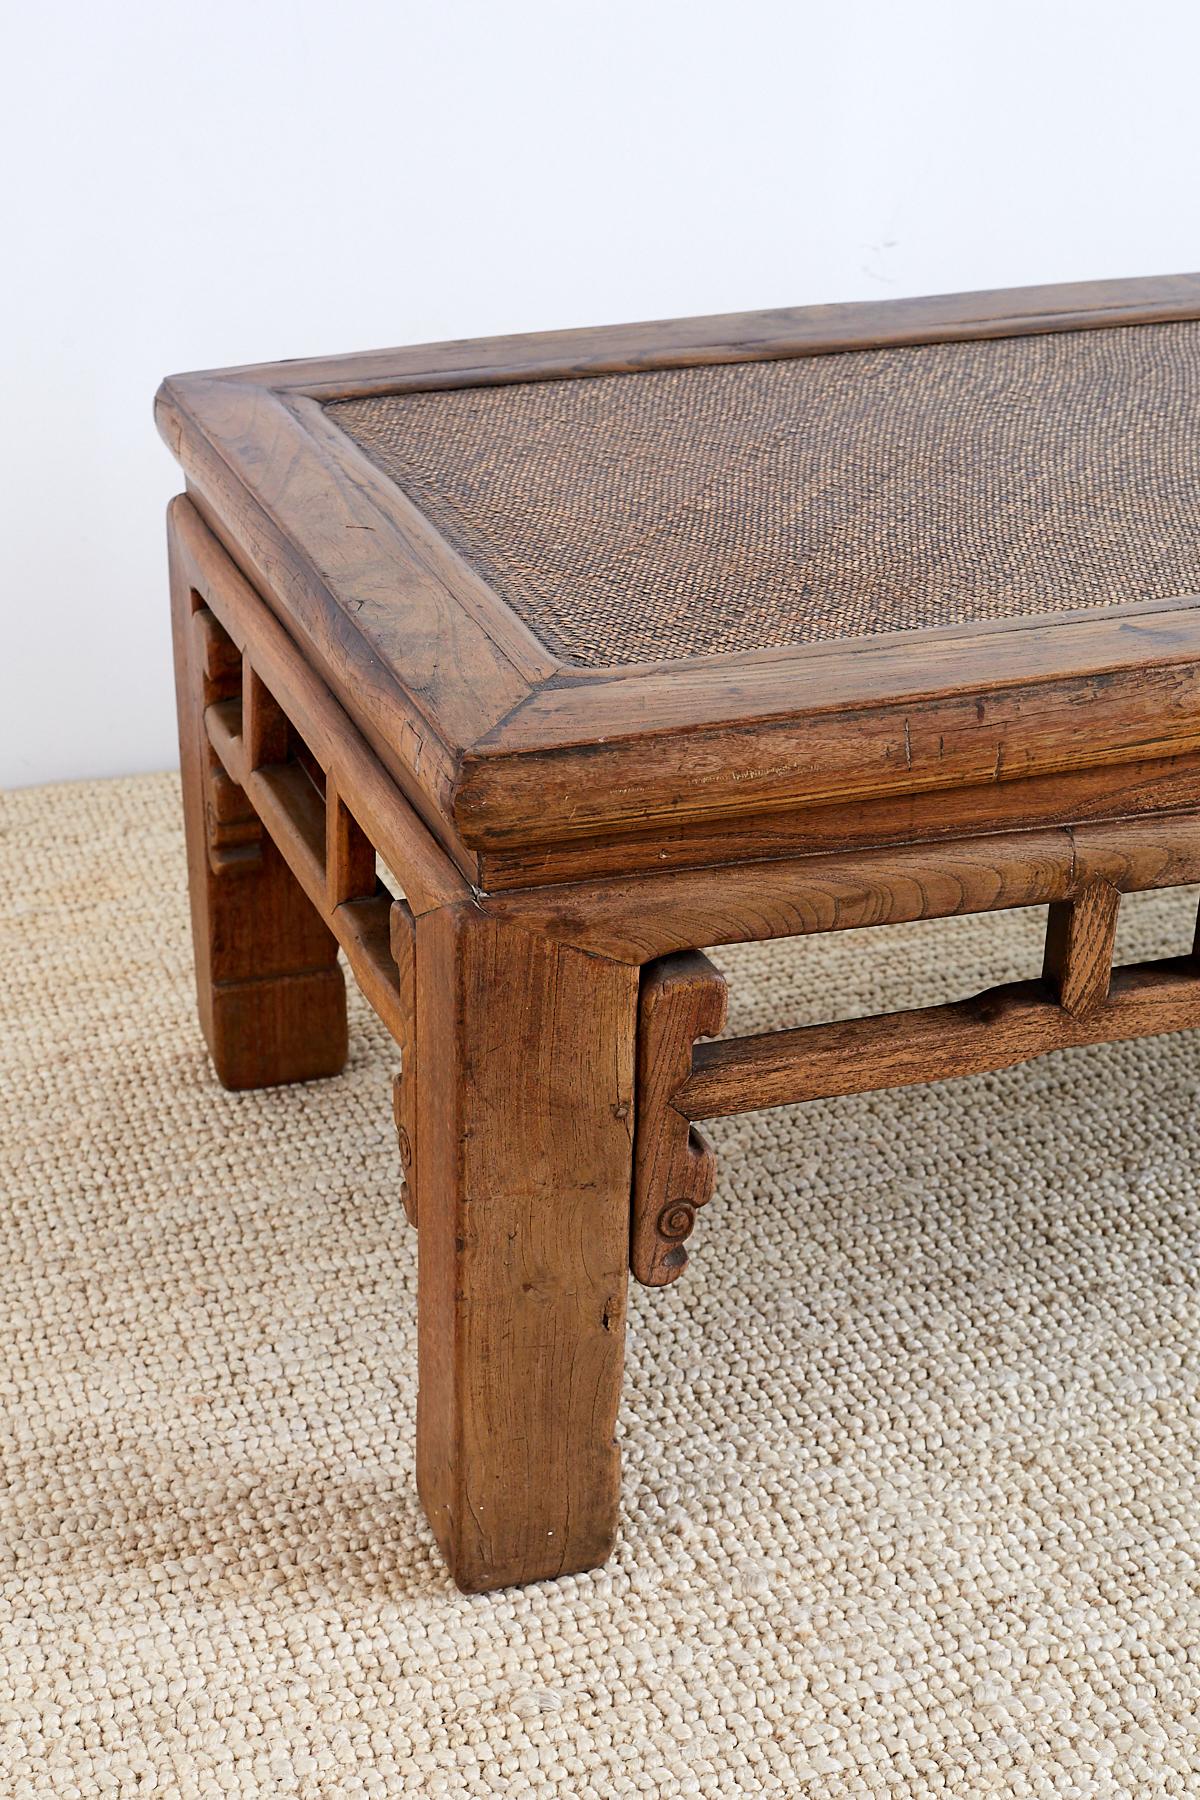 Hand-Carved Chinese Hardwood Bench Coffee Table with Raffia Seat